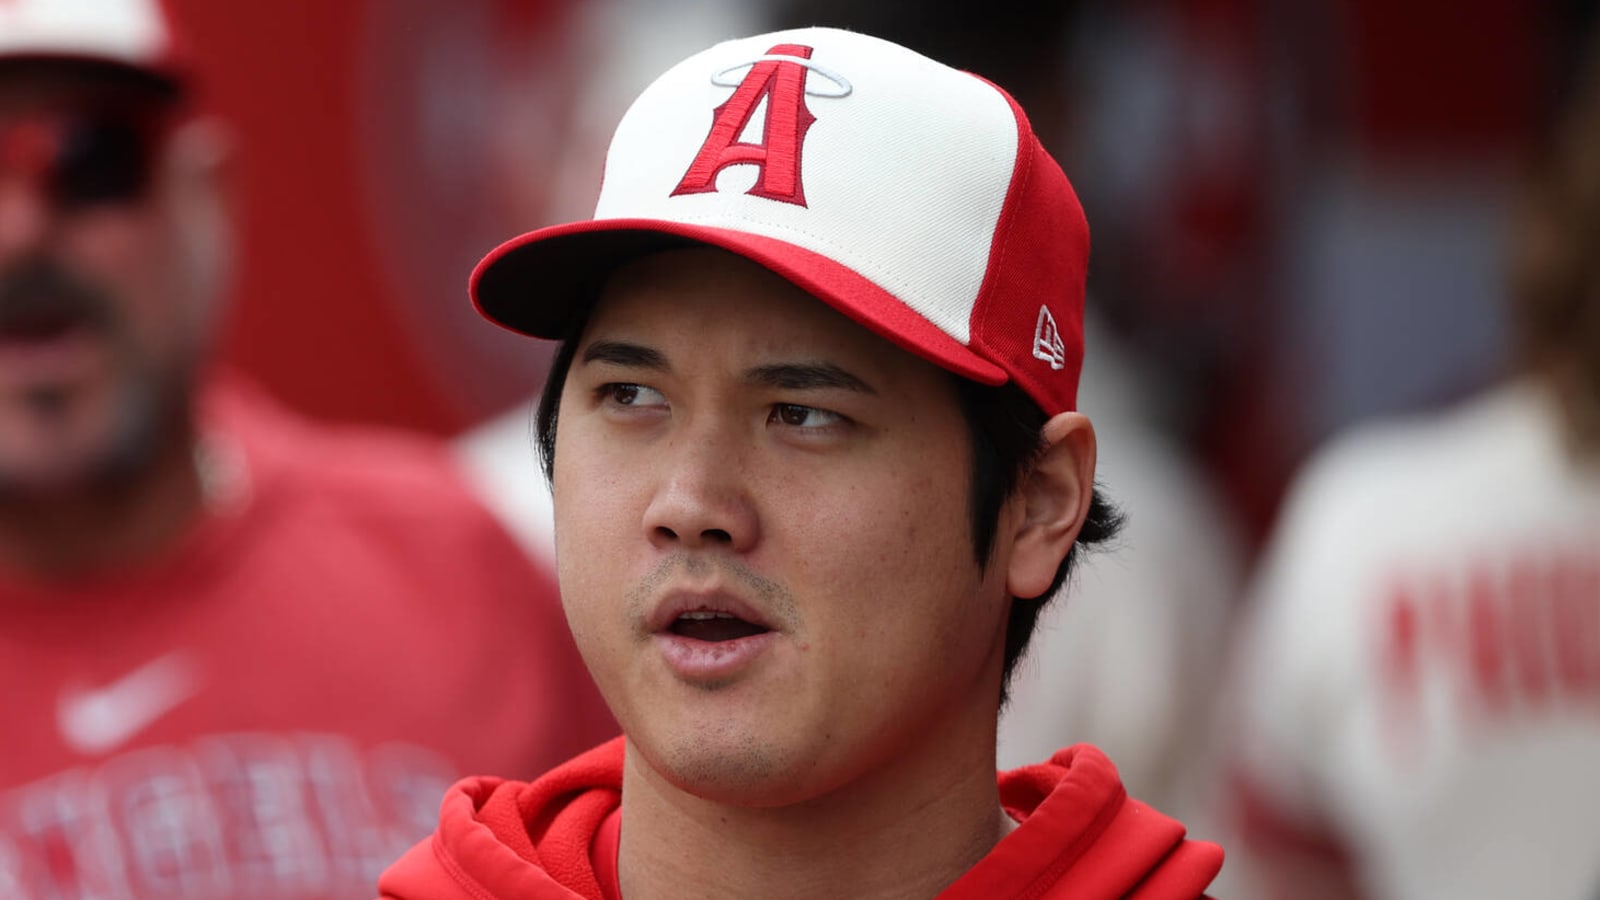 Insider expands on why Shohei Ohtani snubbed Yankees, Mets